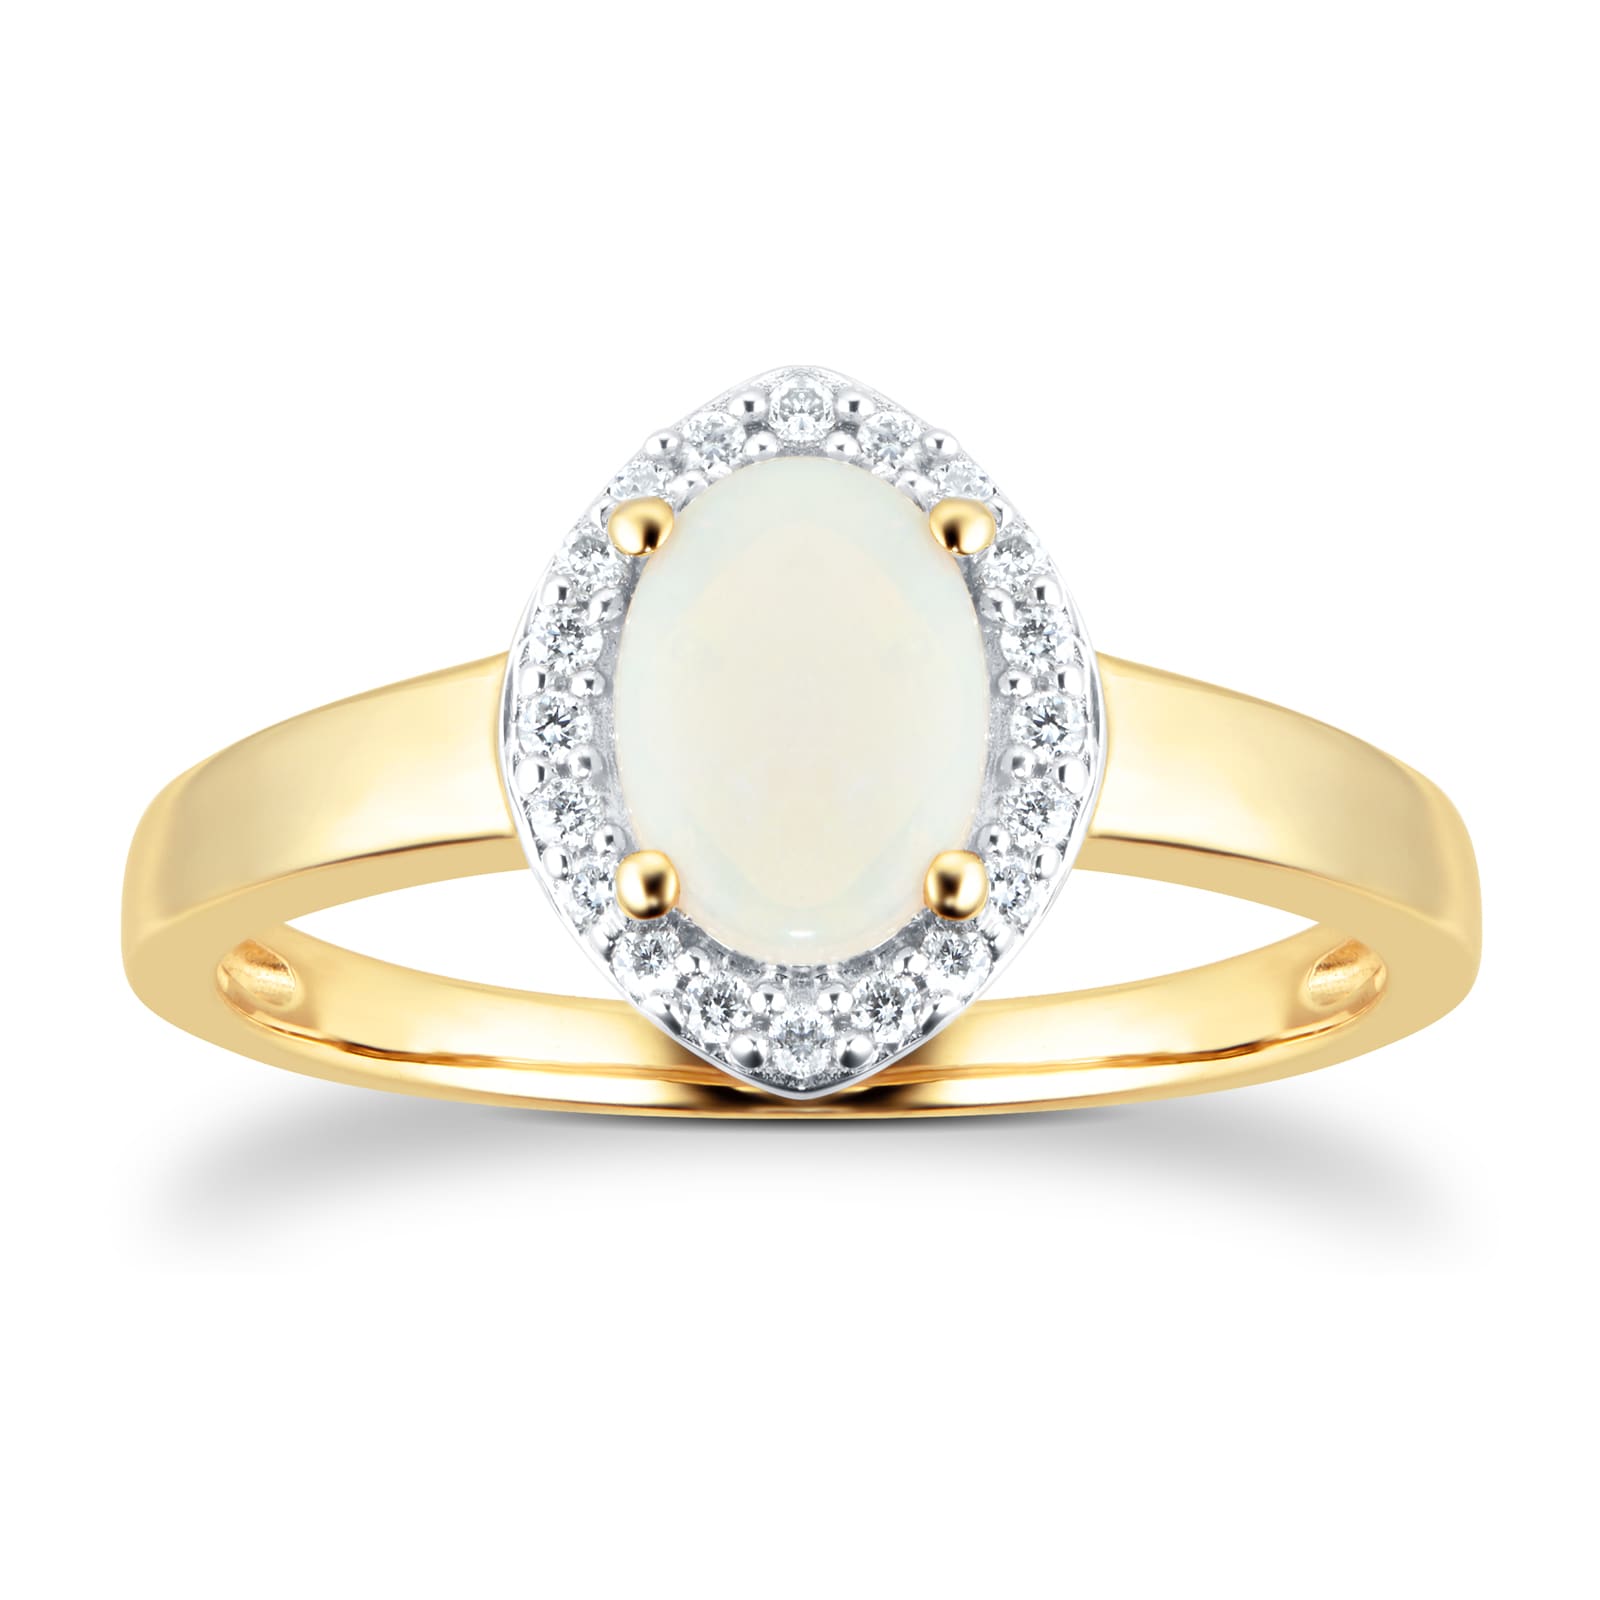 Oval Cut Opal And Diamond Set Ring In 9 Carat Yellow Gold - Ring Size N